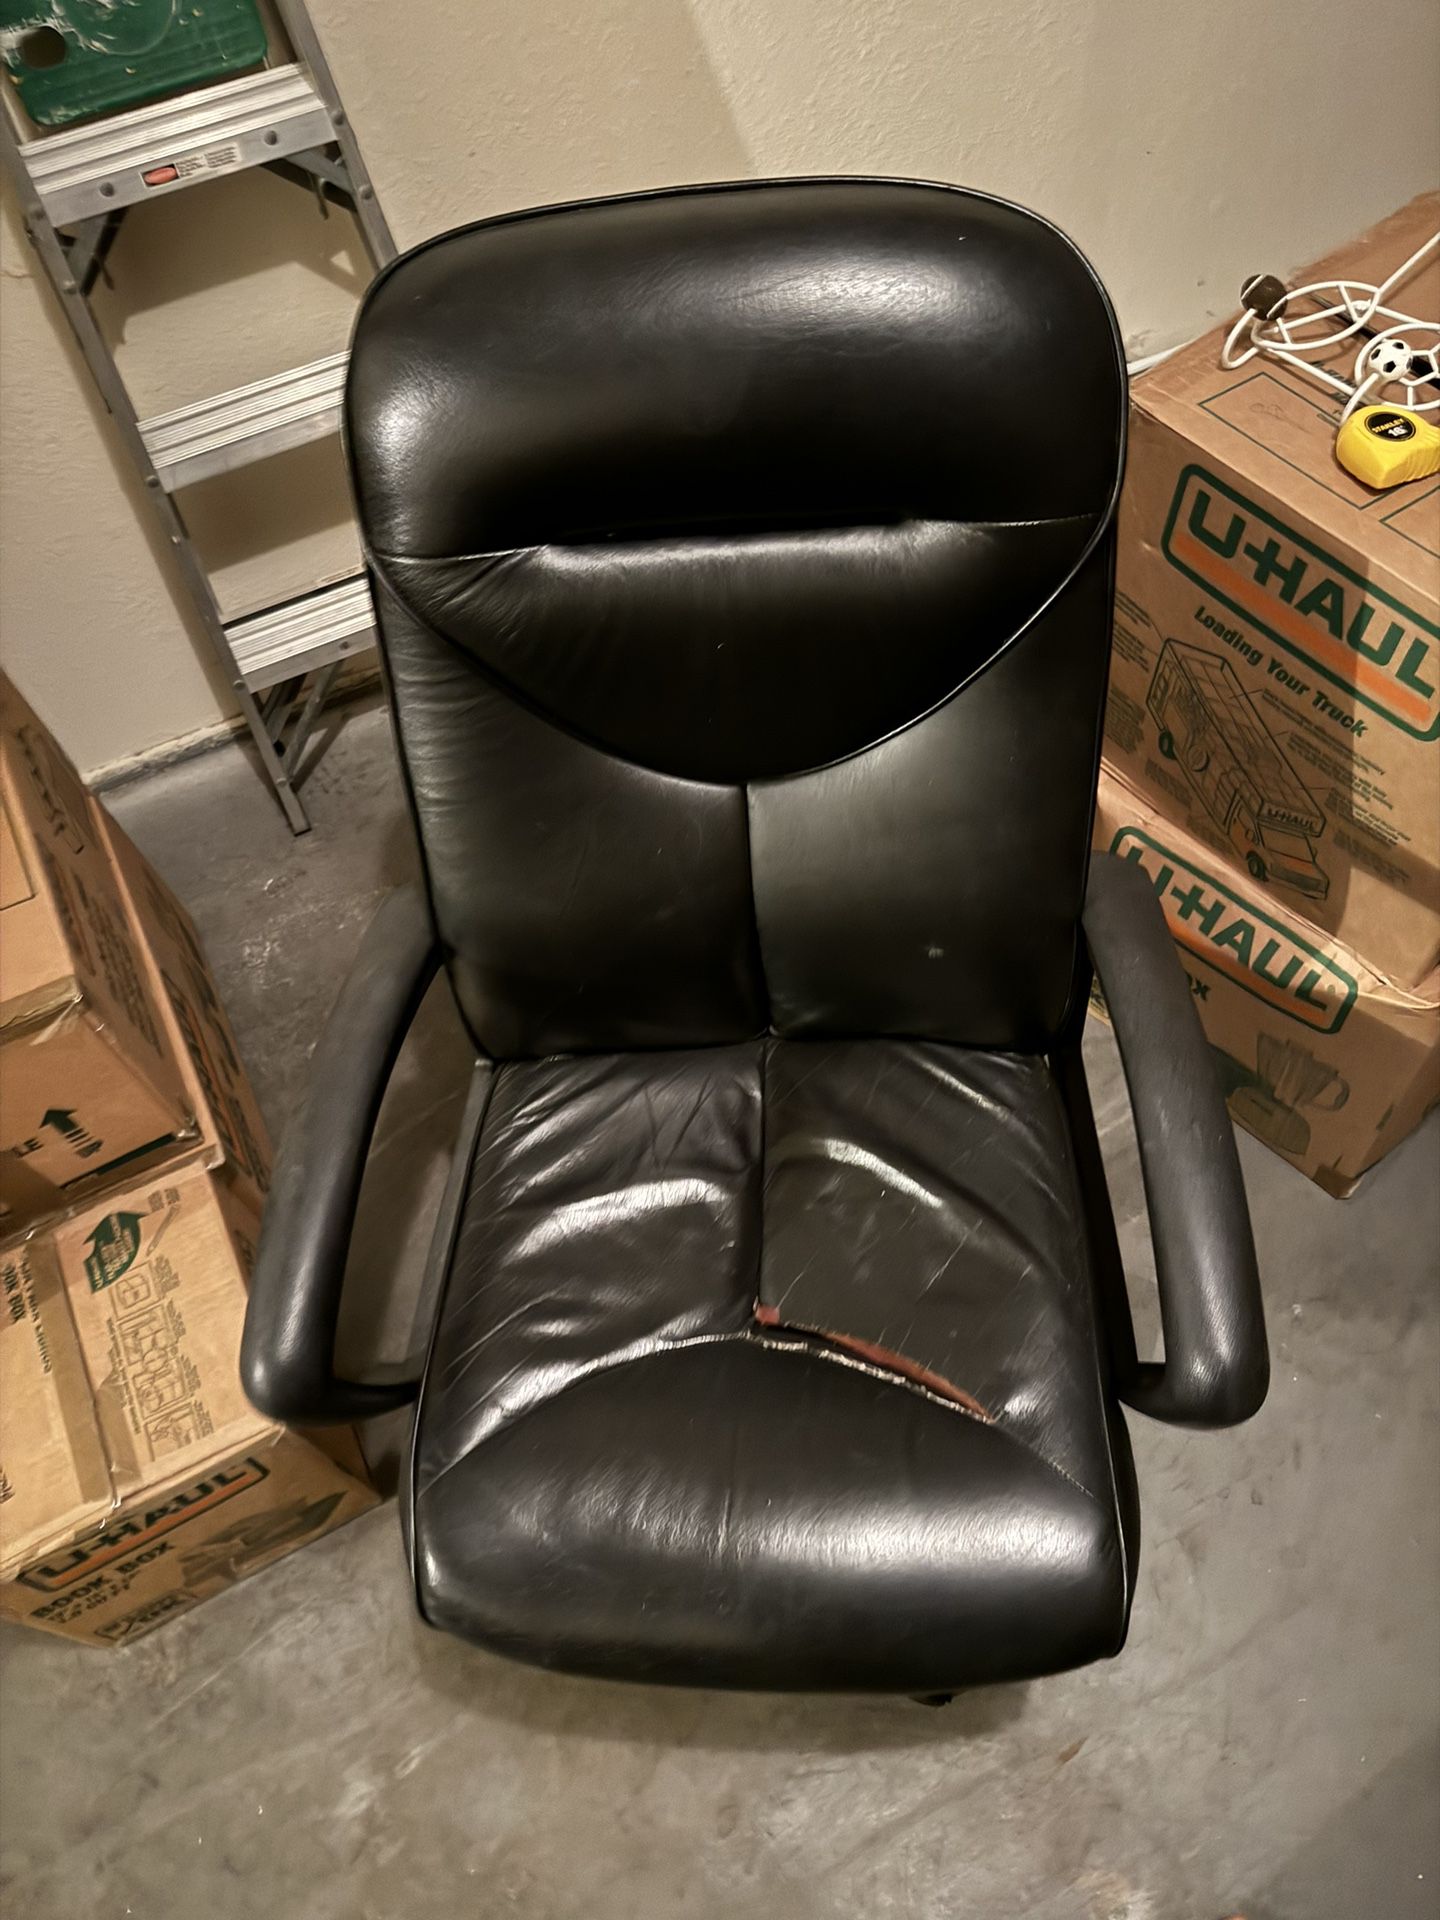 Office Chair /Very Comfortable 